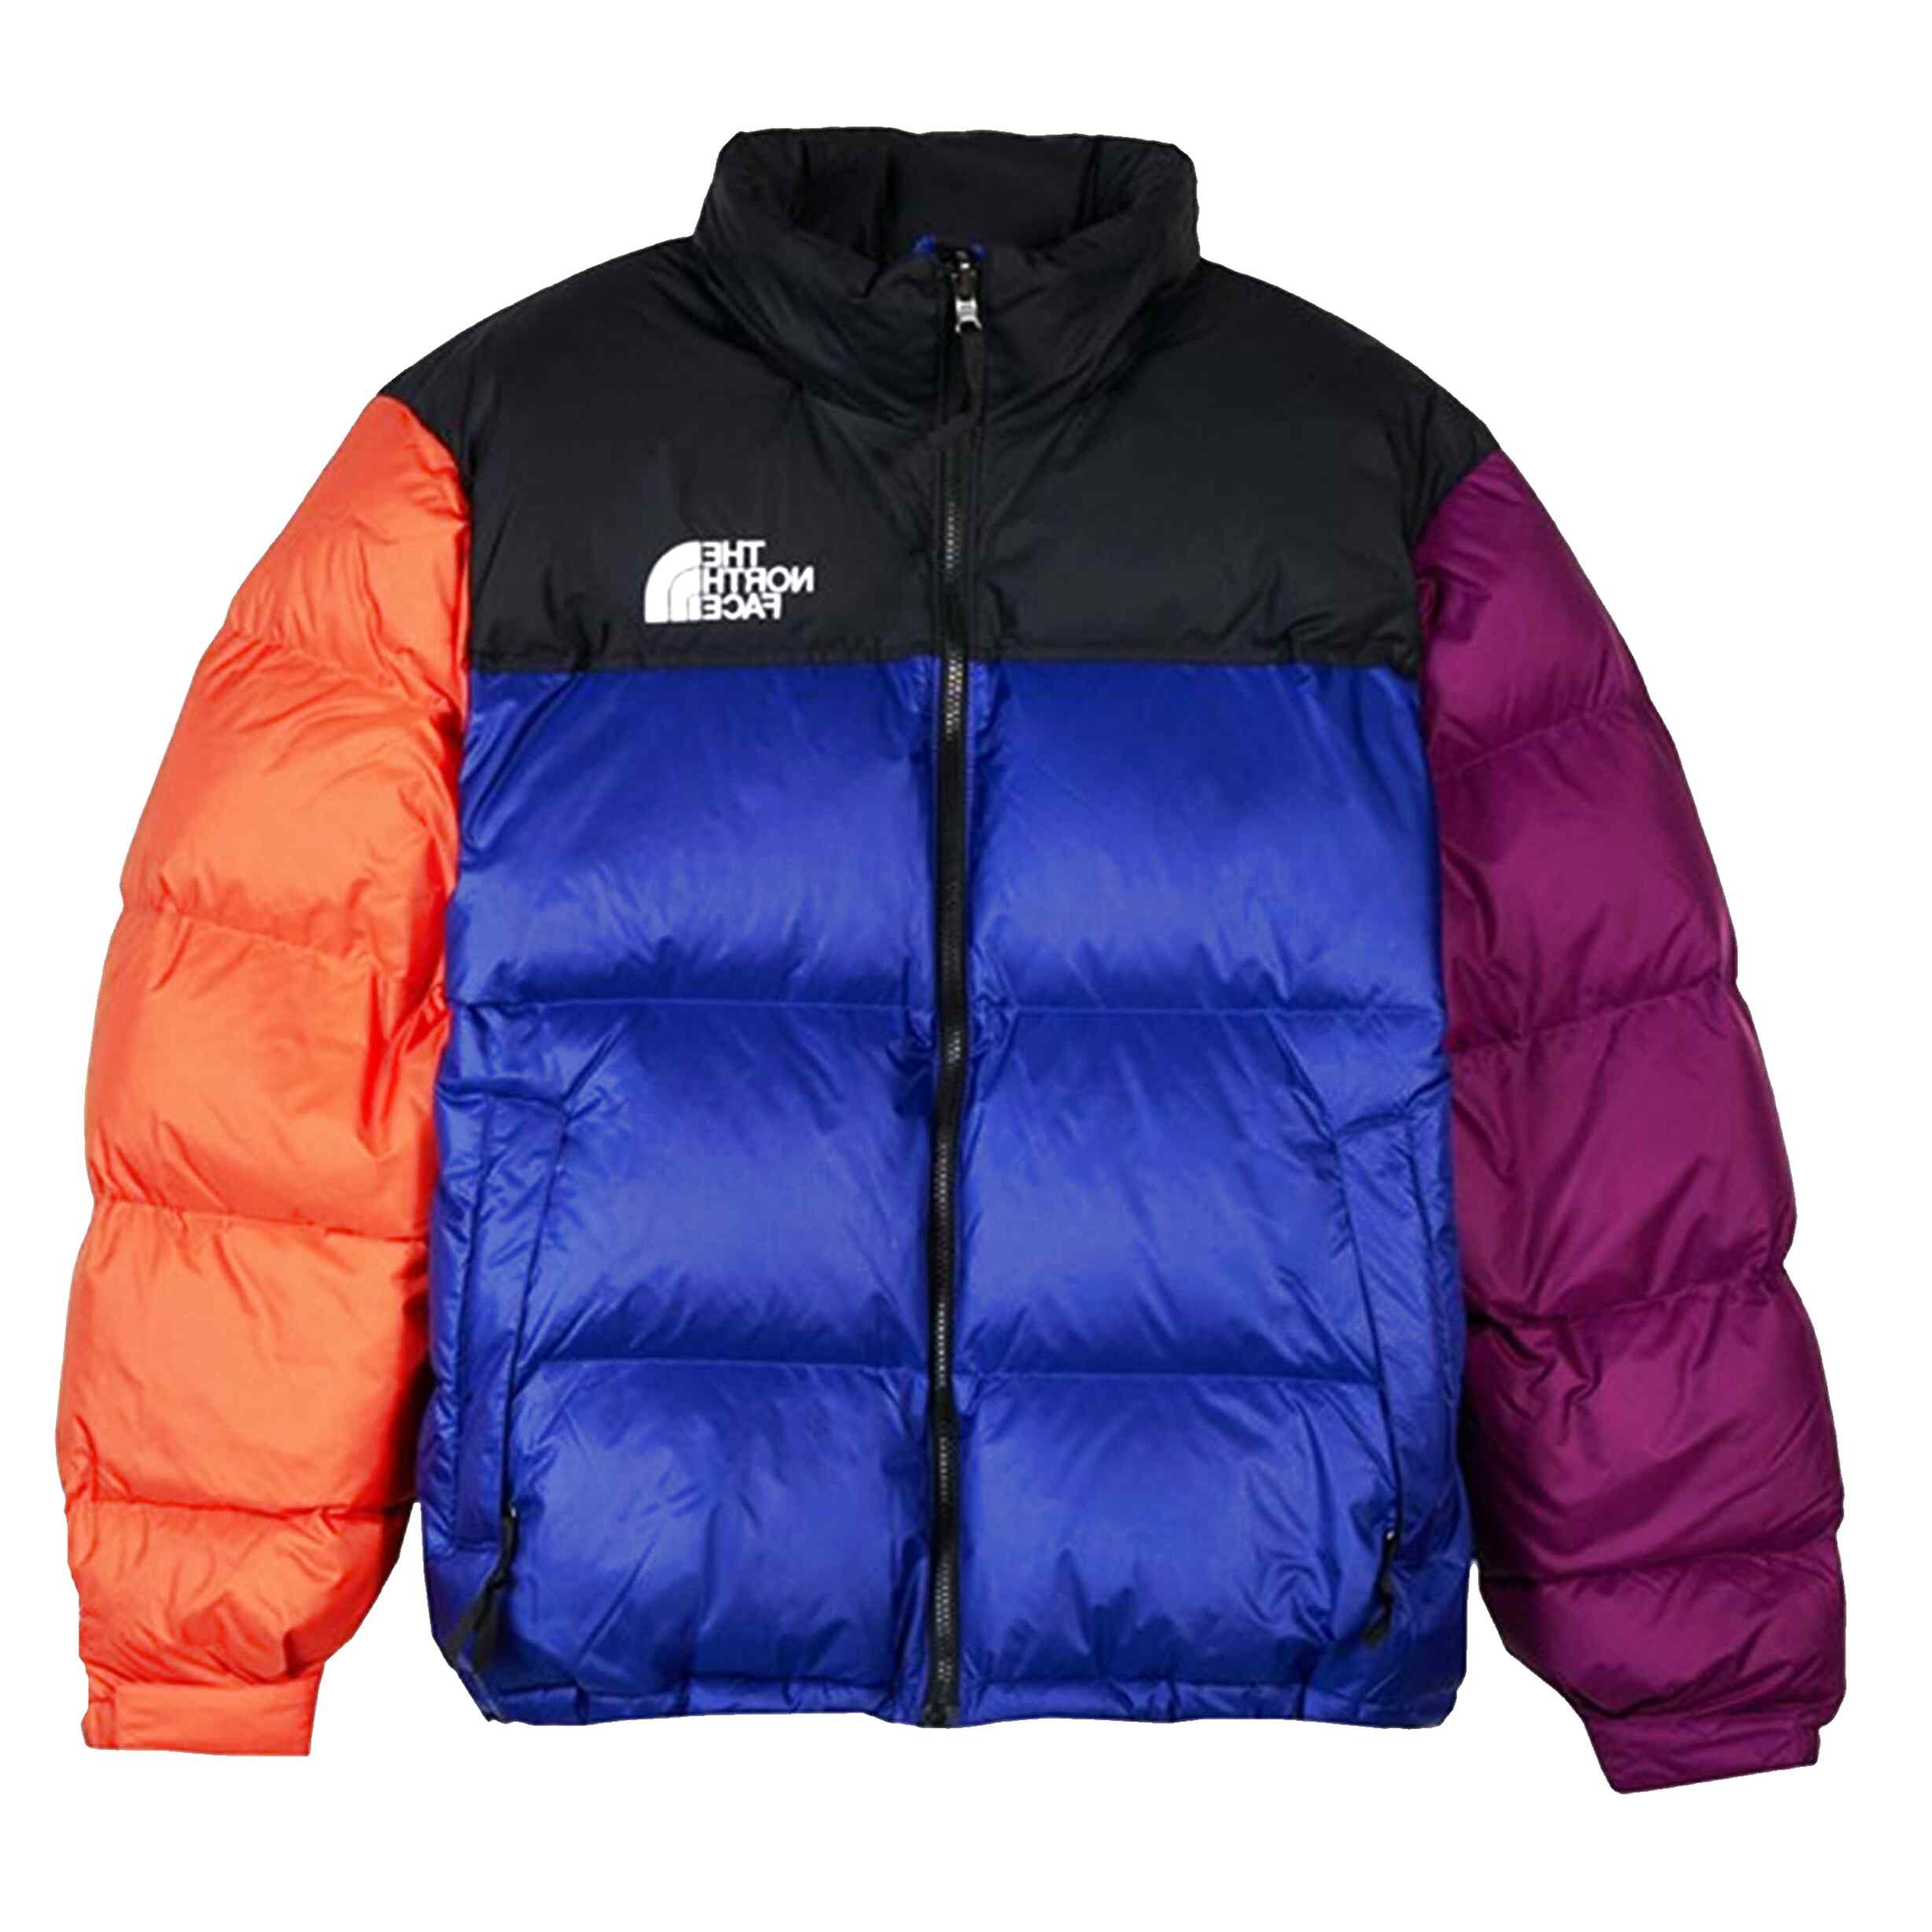 North Face 700 for sale in UK | 86 used North Face 700